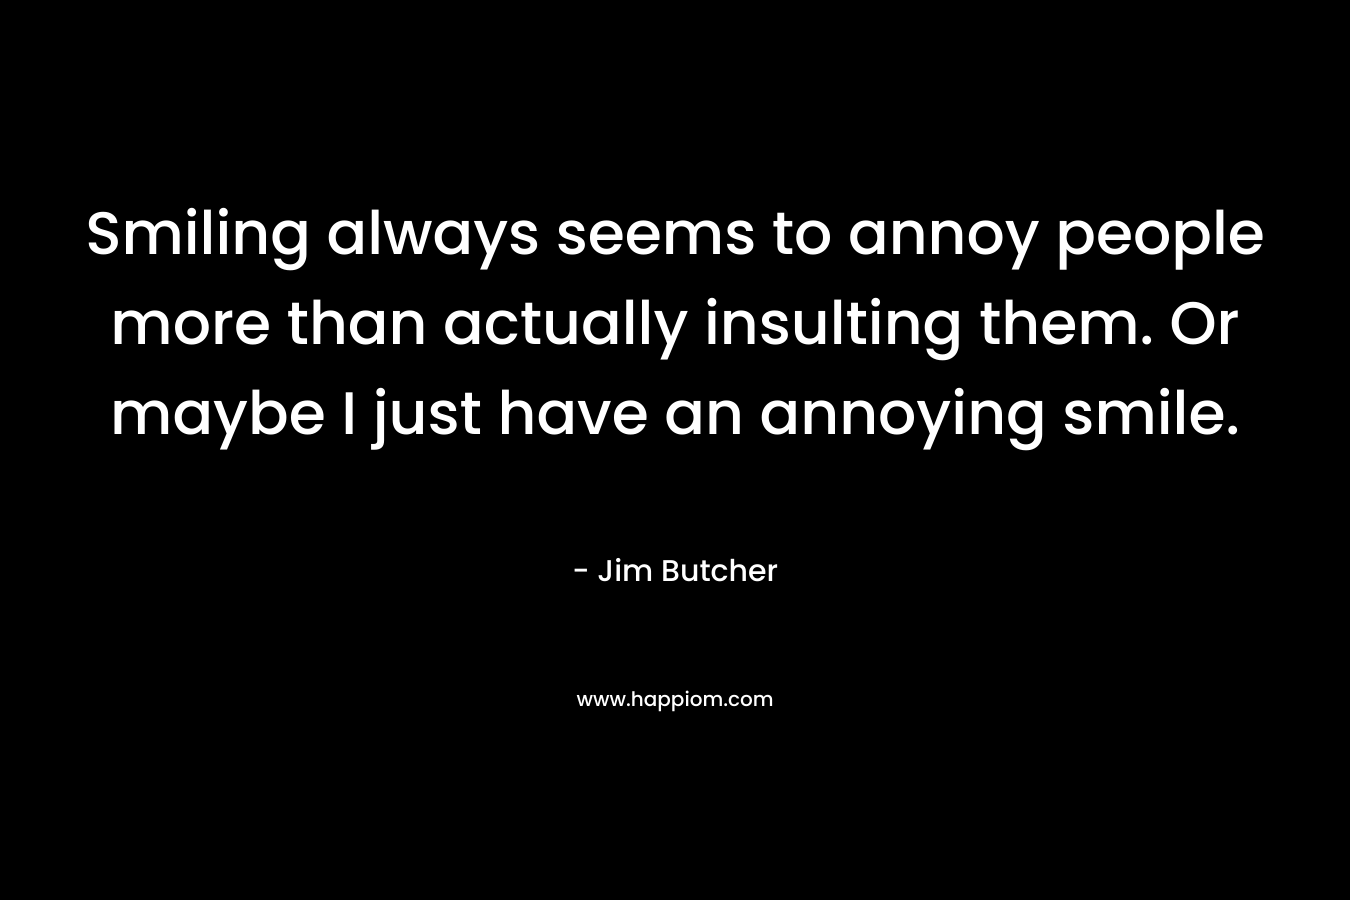 Smiling always seems to annoy people more than actually insulting them. Or maybe I just have an annoying smile. – Jim Butcher